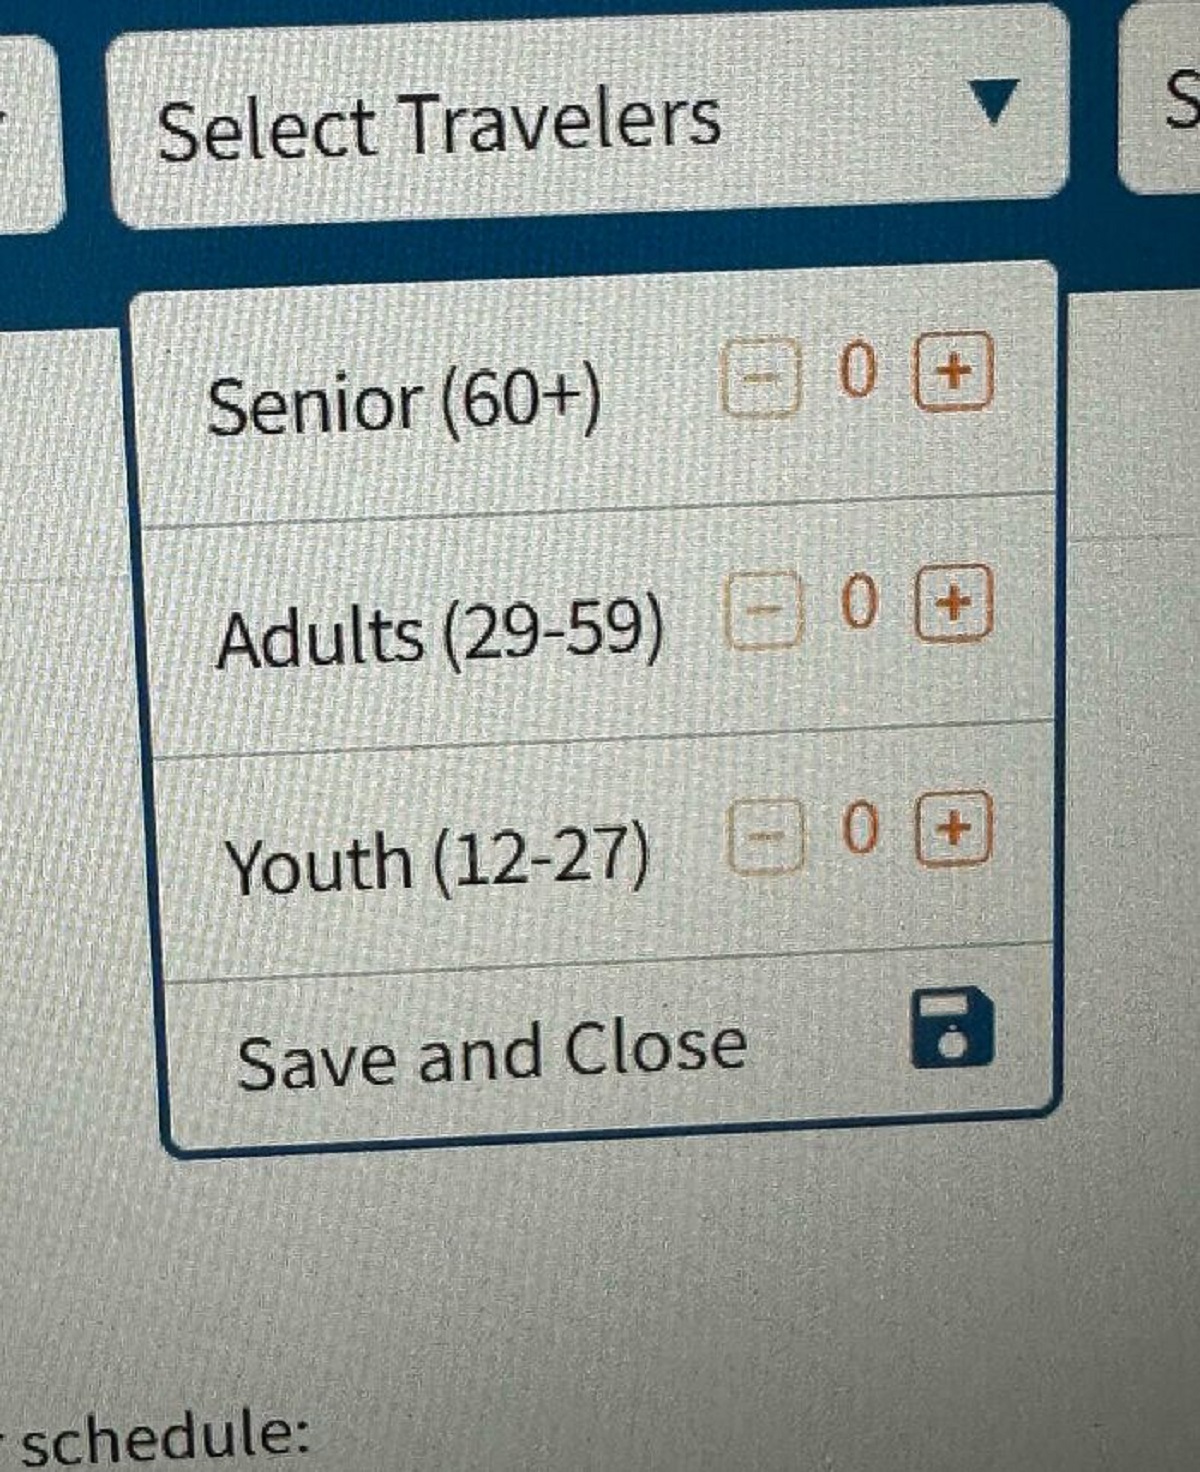 screenshot - Select Travelers Senior 60 000 Adults 2959 00 Youth 1227 00 Save and Close a schedule